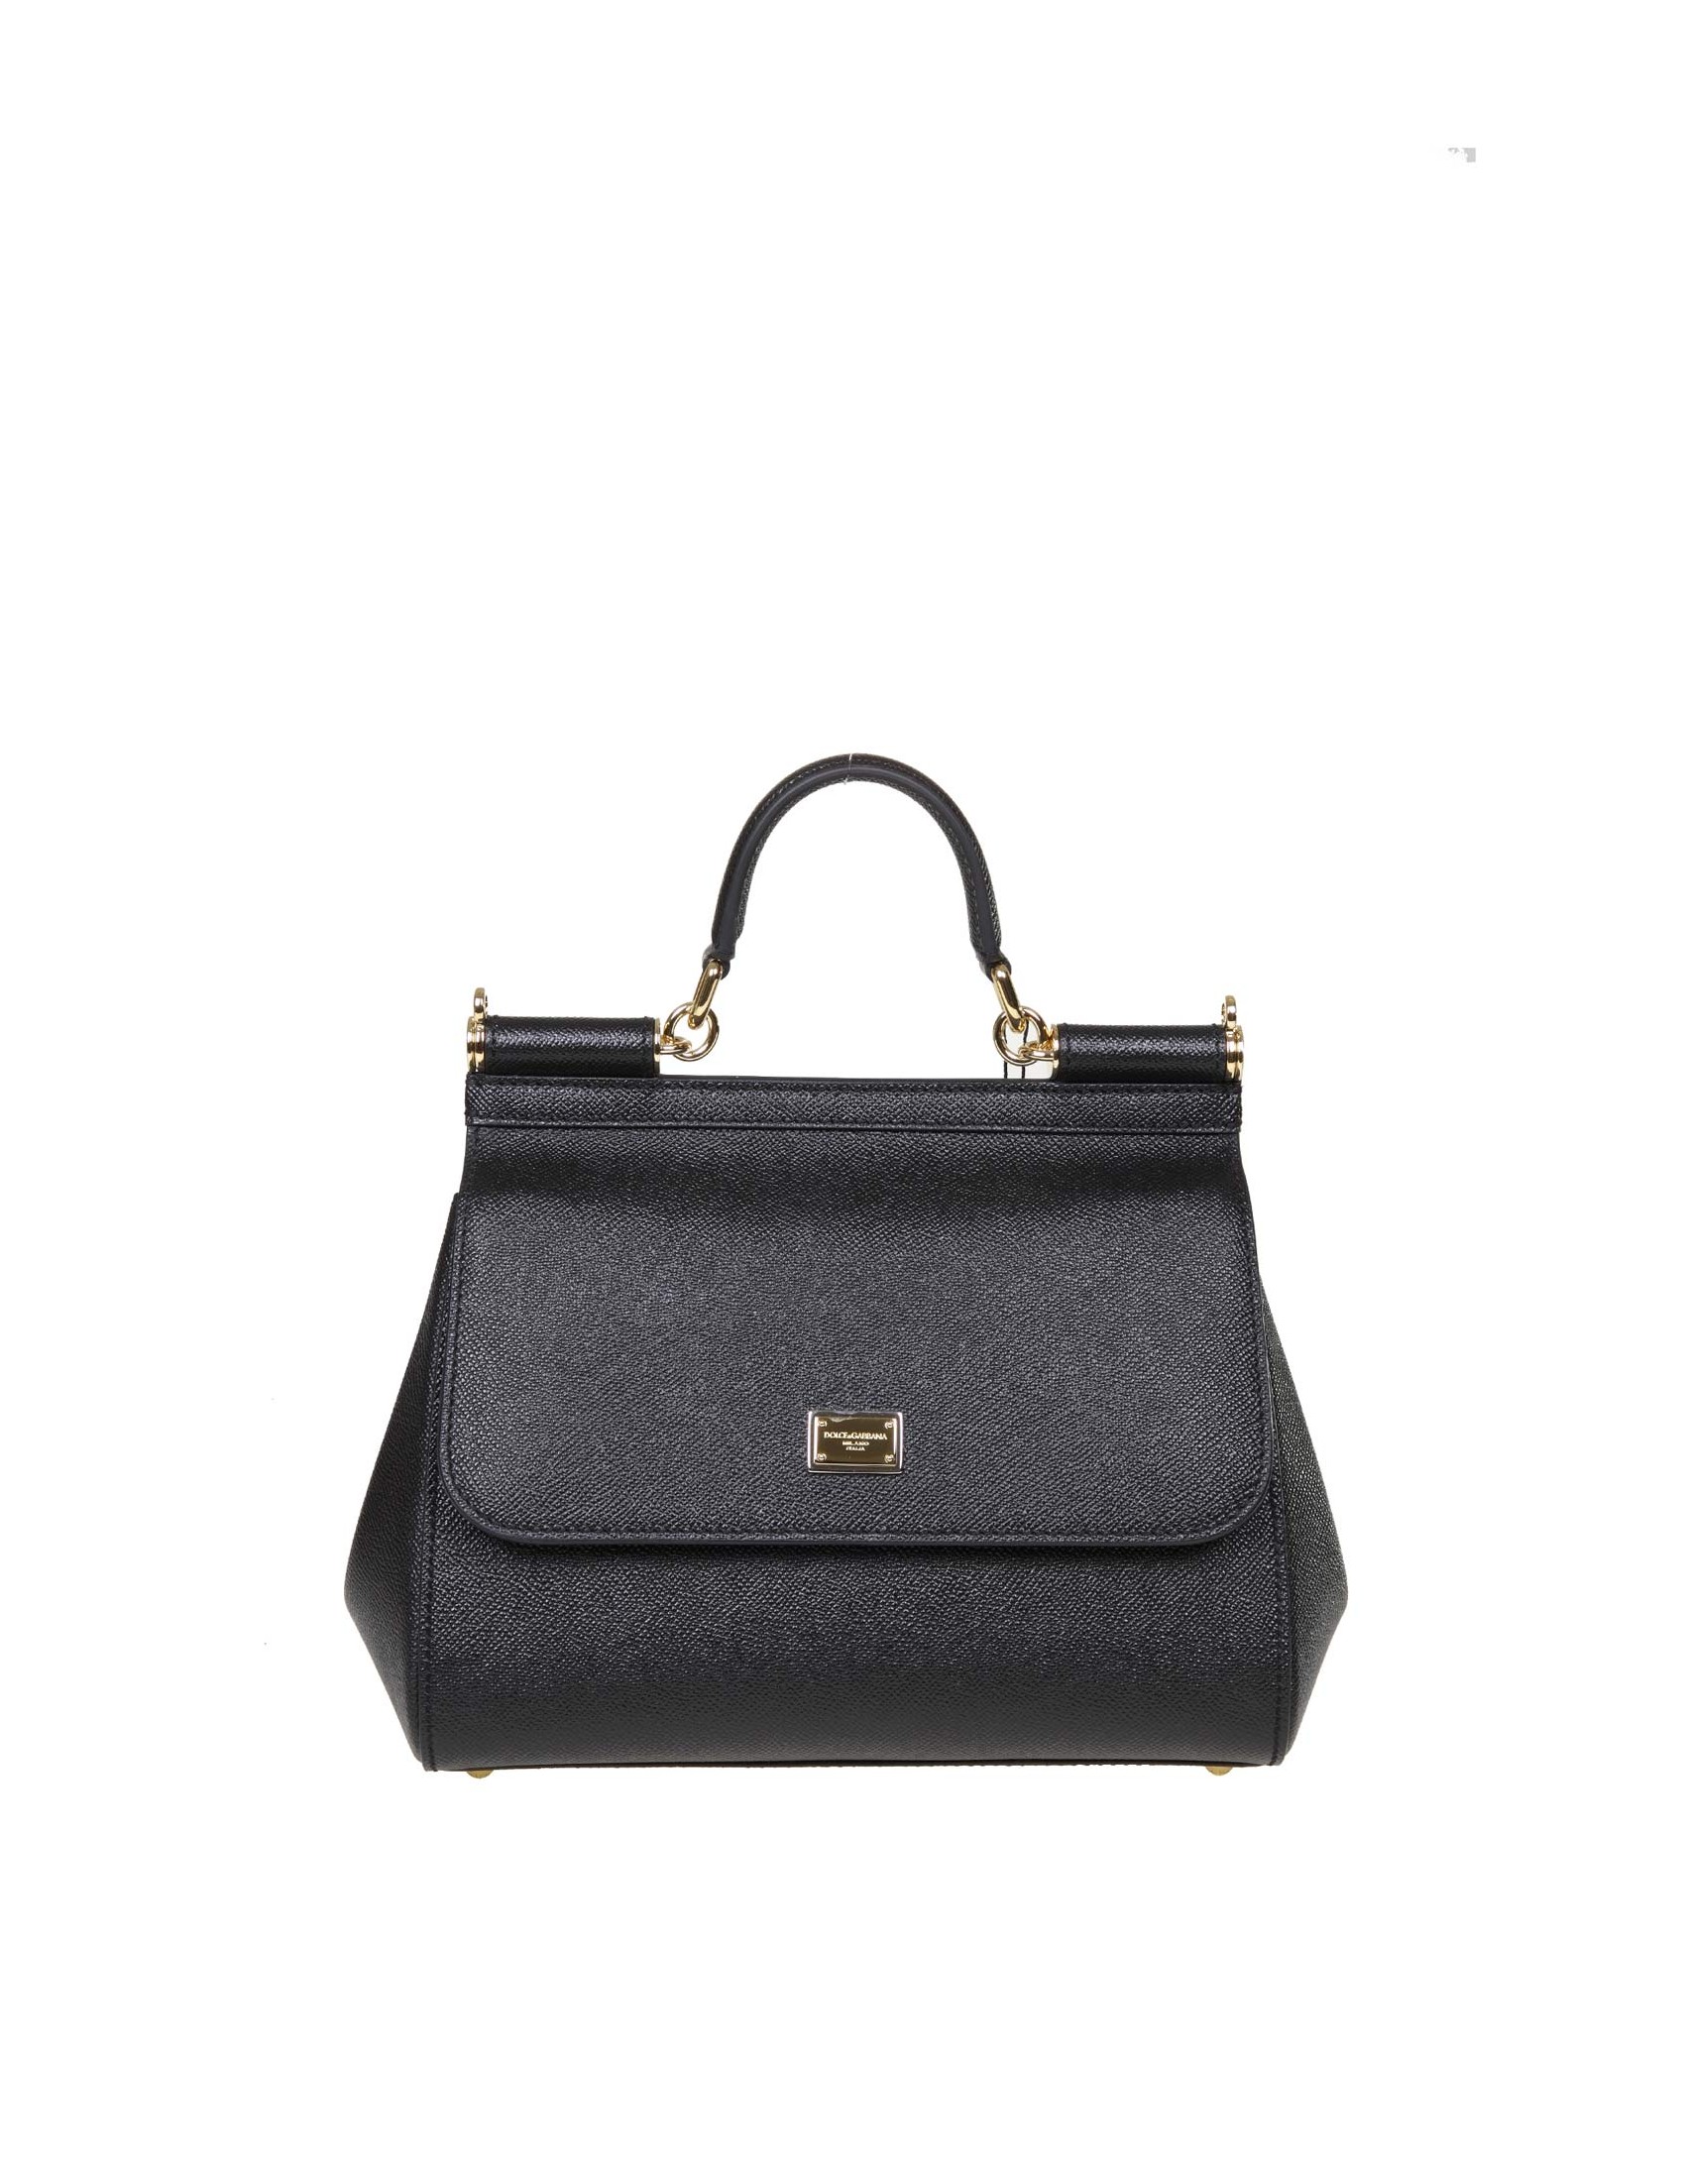 DOLCE & GABBANA SMALL SICILY BAG IN BLACK DAUPHINE LEATHER